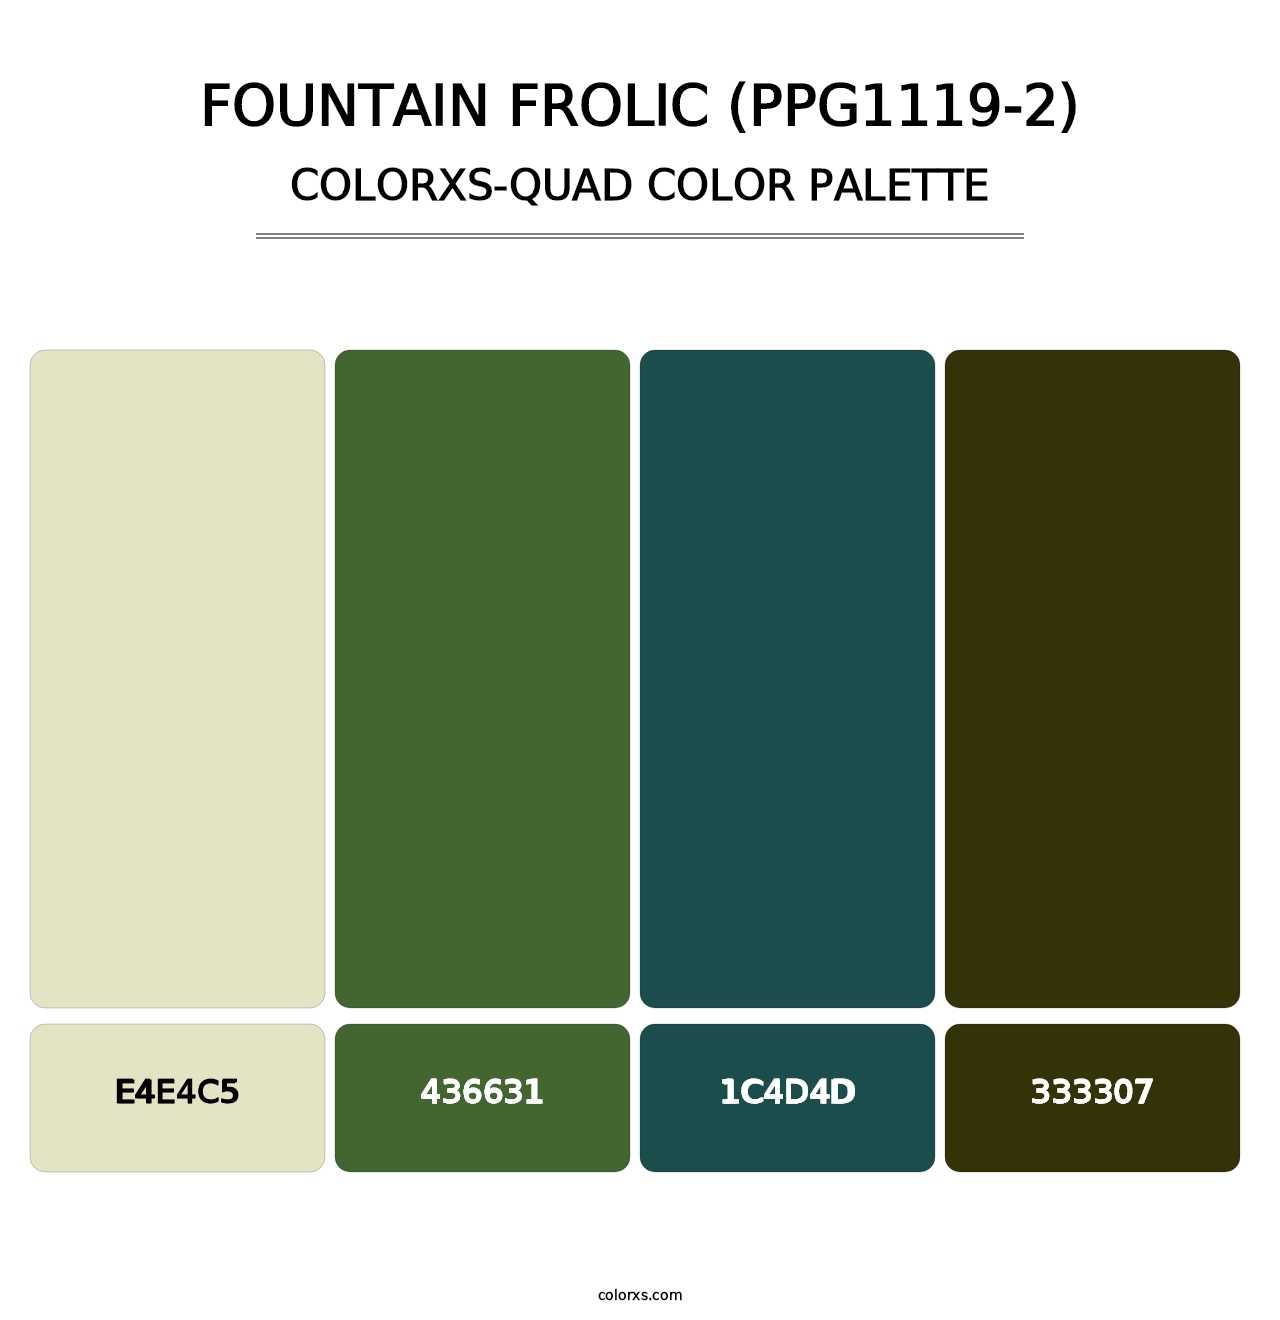 Fountain Frolic (PPG1119-2) - Colorxs Quad Palette